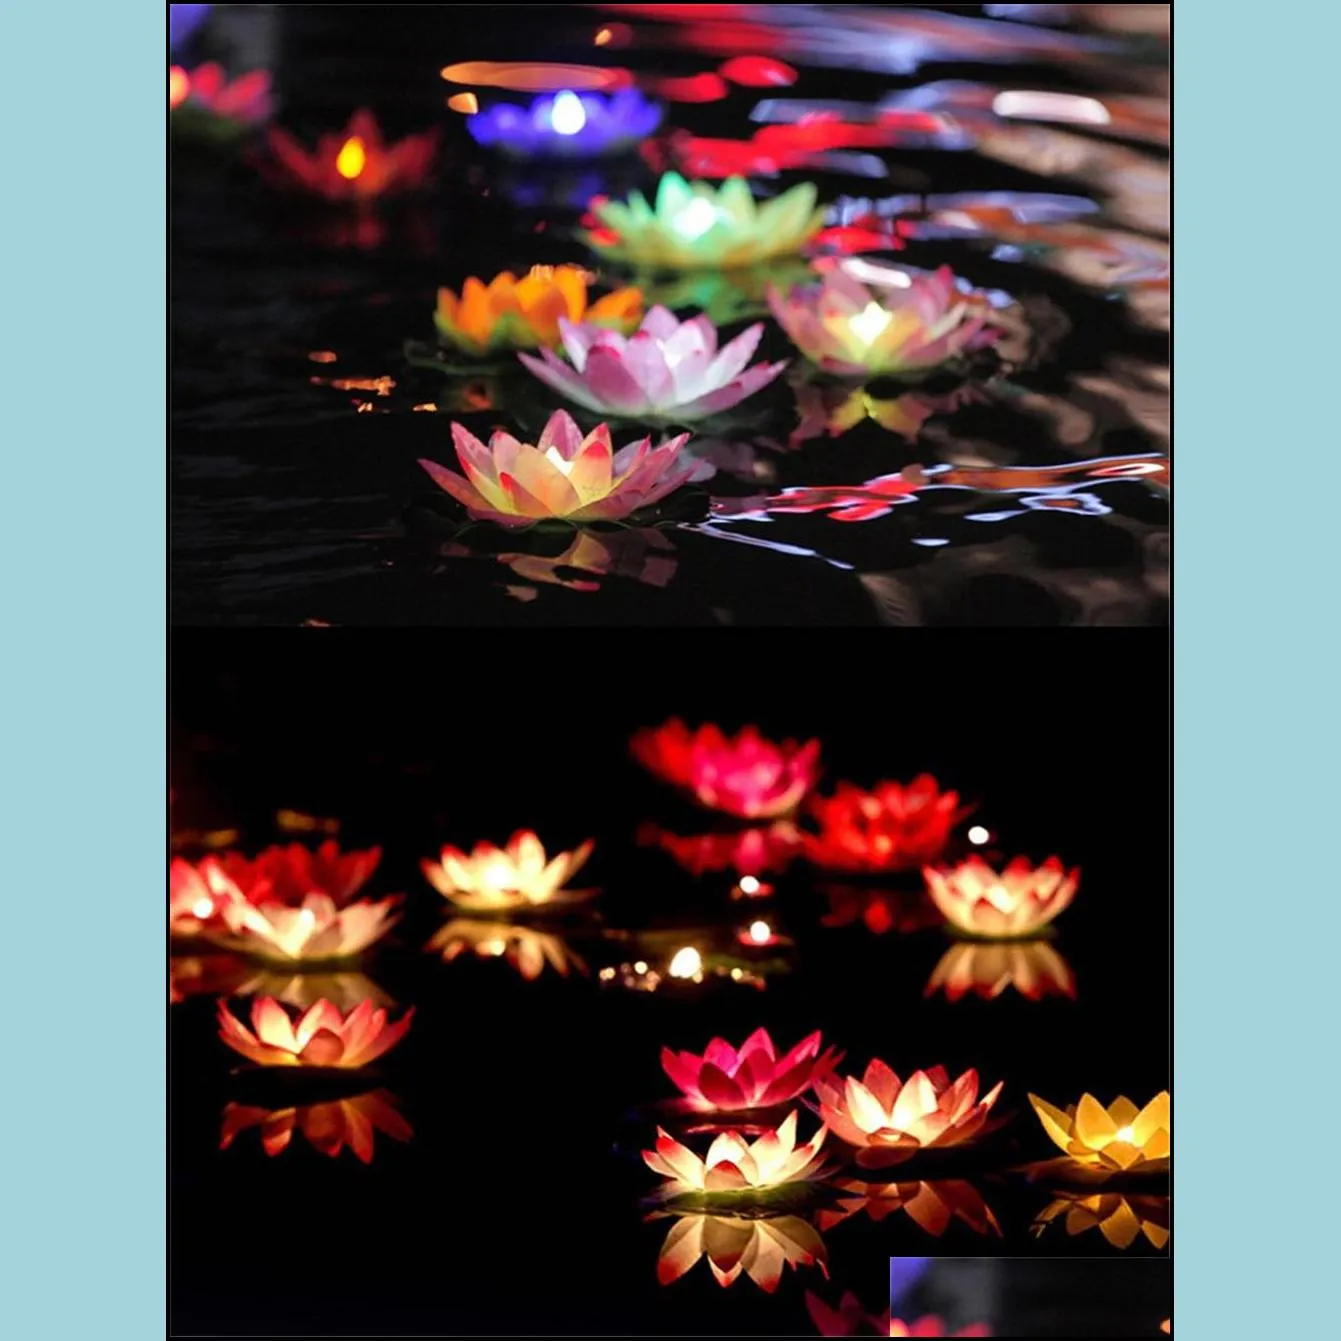 Festive Diameter 18 cm LED Lotus Lamp in Colorful Changed Floating Water Pool Wishing Light Lamps Lanterns for Party Decoration